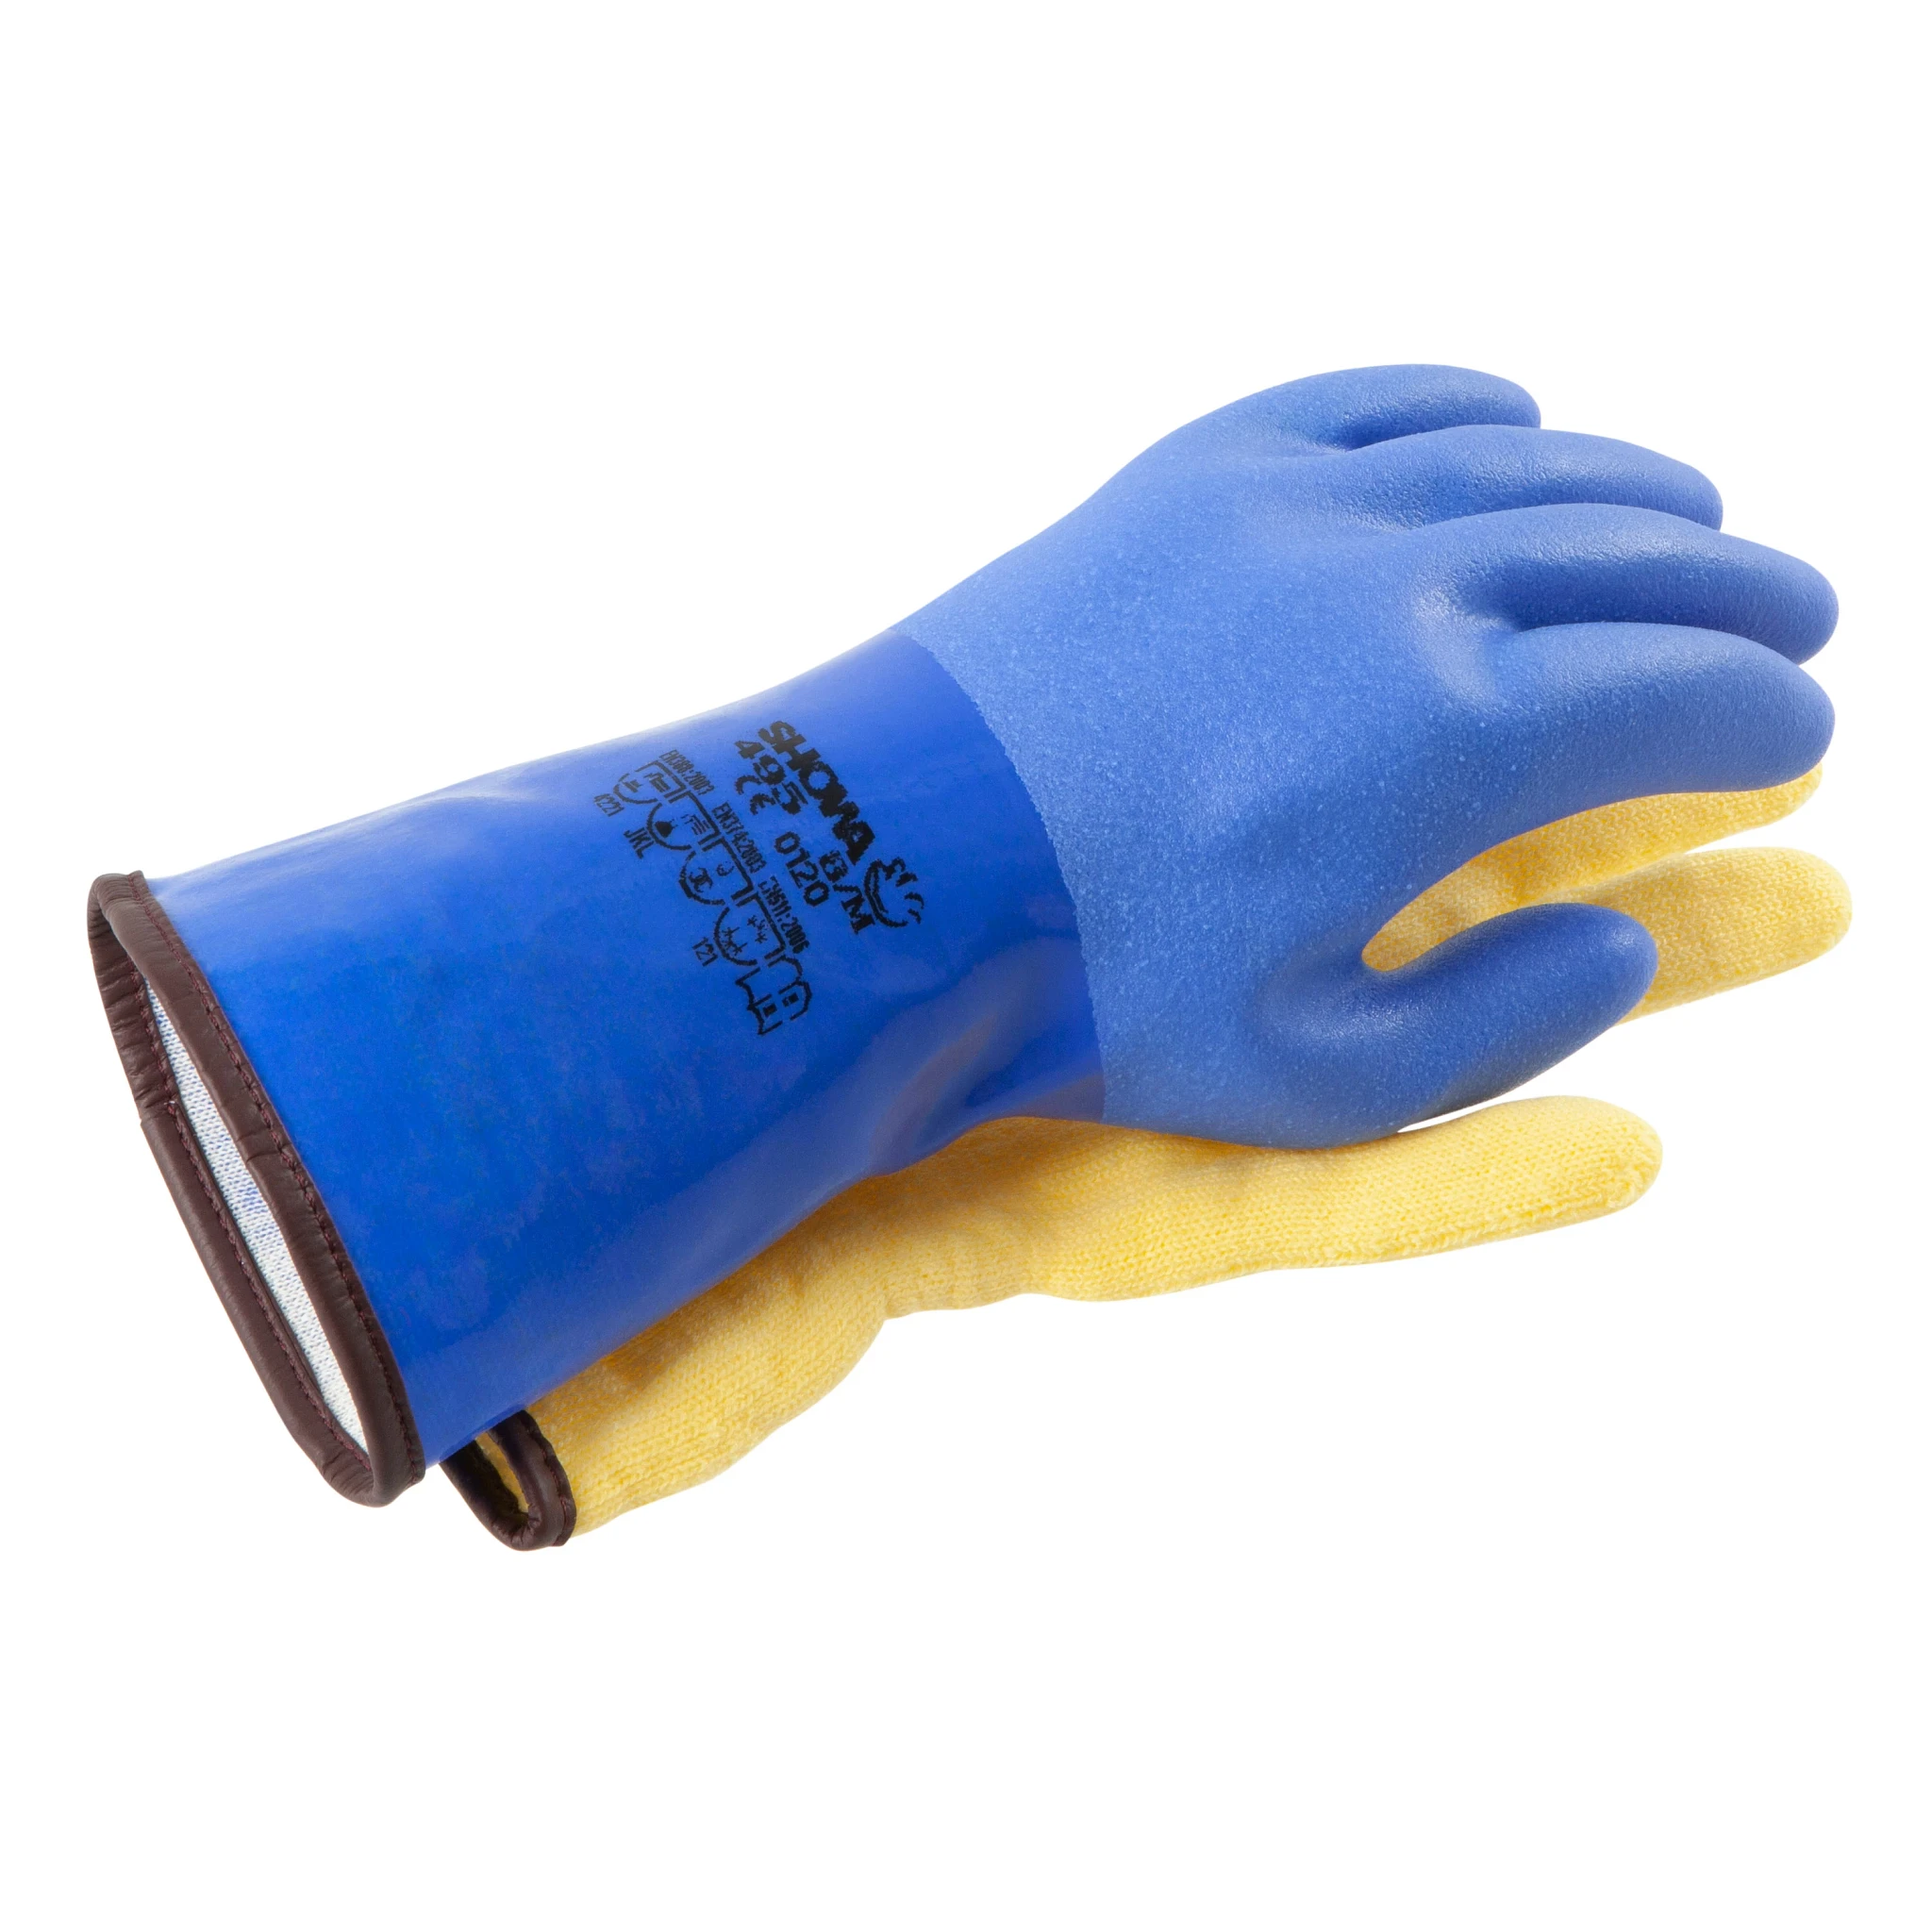 68.235.300, BLUE DRY GLOVE WITH LINER.